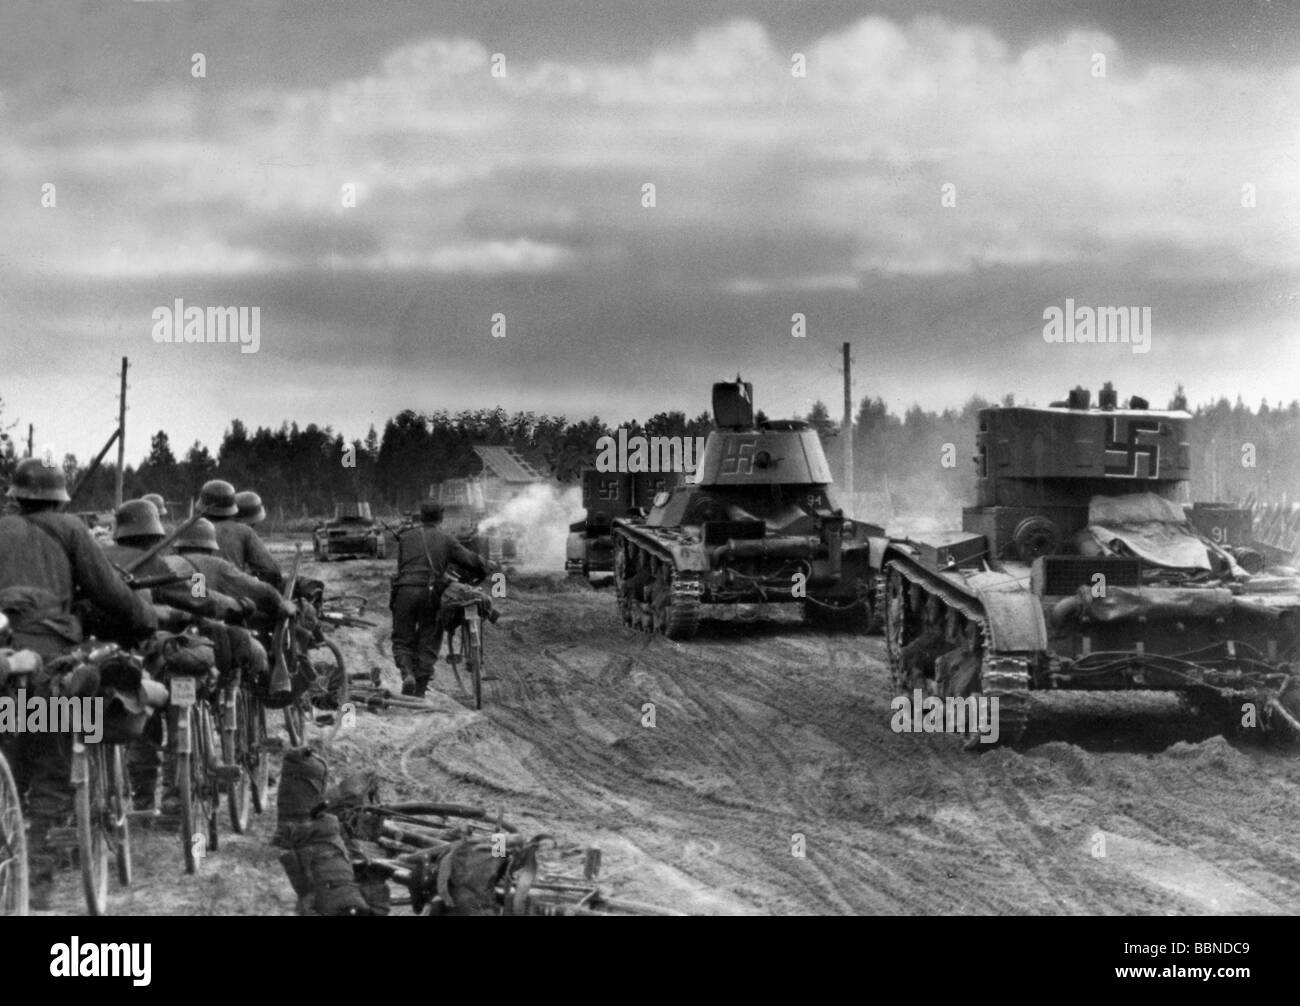 events, Second World War / WWII, Finland, Karelia, Finnish soldiers with captured Soviet light tanks T-26 advancing, probably 1941, bicycle squadron, bicycles, 20th century, historic, historical, military, Finnish national emblem, swastika, swastikas, road, uniforms, uniform, steel helmets, T26, T 26, Continuation War 1941 - 1944, people, 1940s, Stock Photo